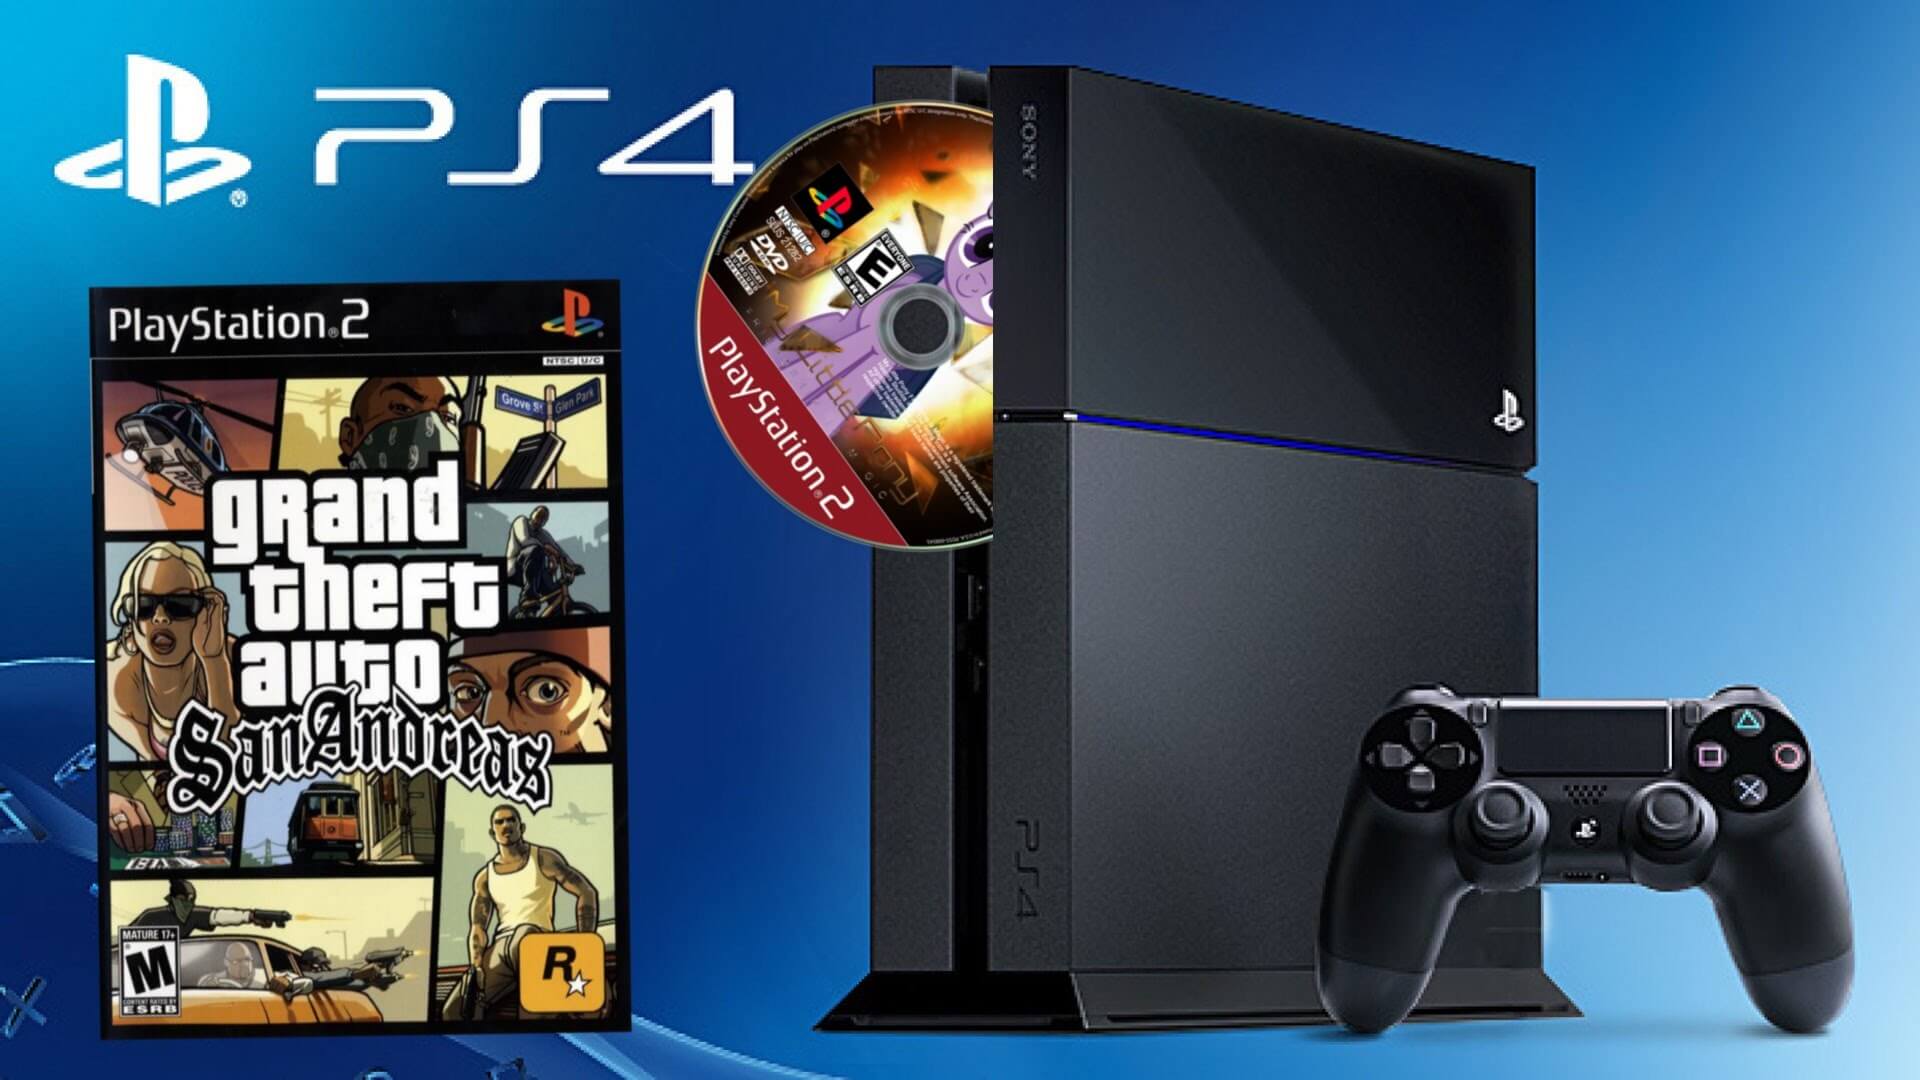 Sony PLAYSTATION 4 игры. Sony PLAYSTATION 4 диски. Диск плейстейшен 4 PS 5. PS ps2 ps3 ps4 PS 5.